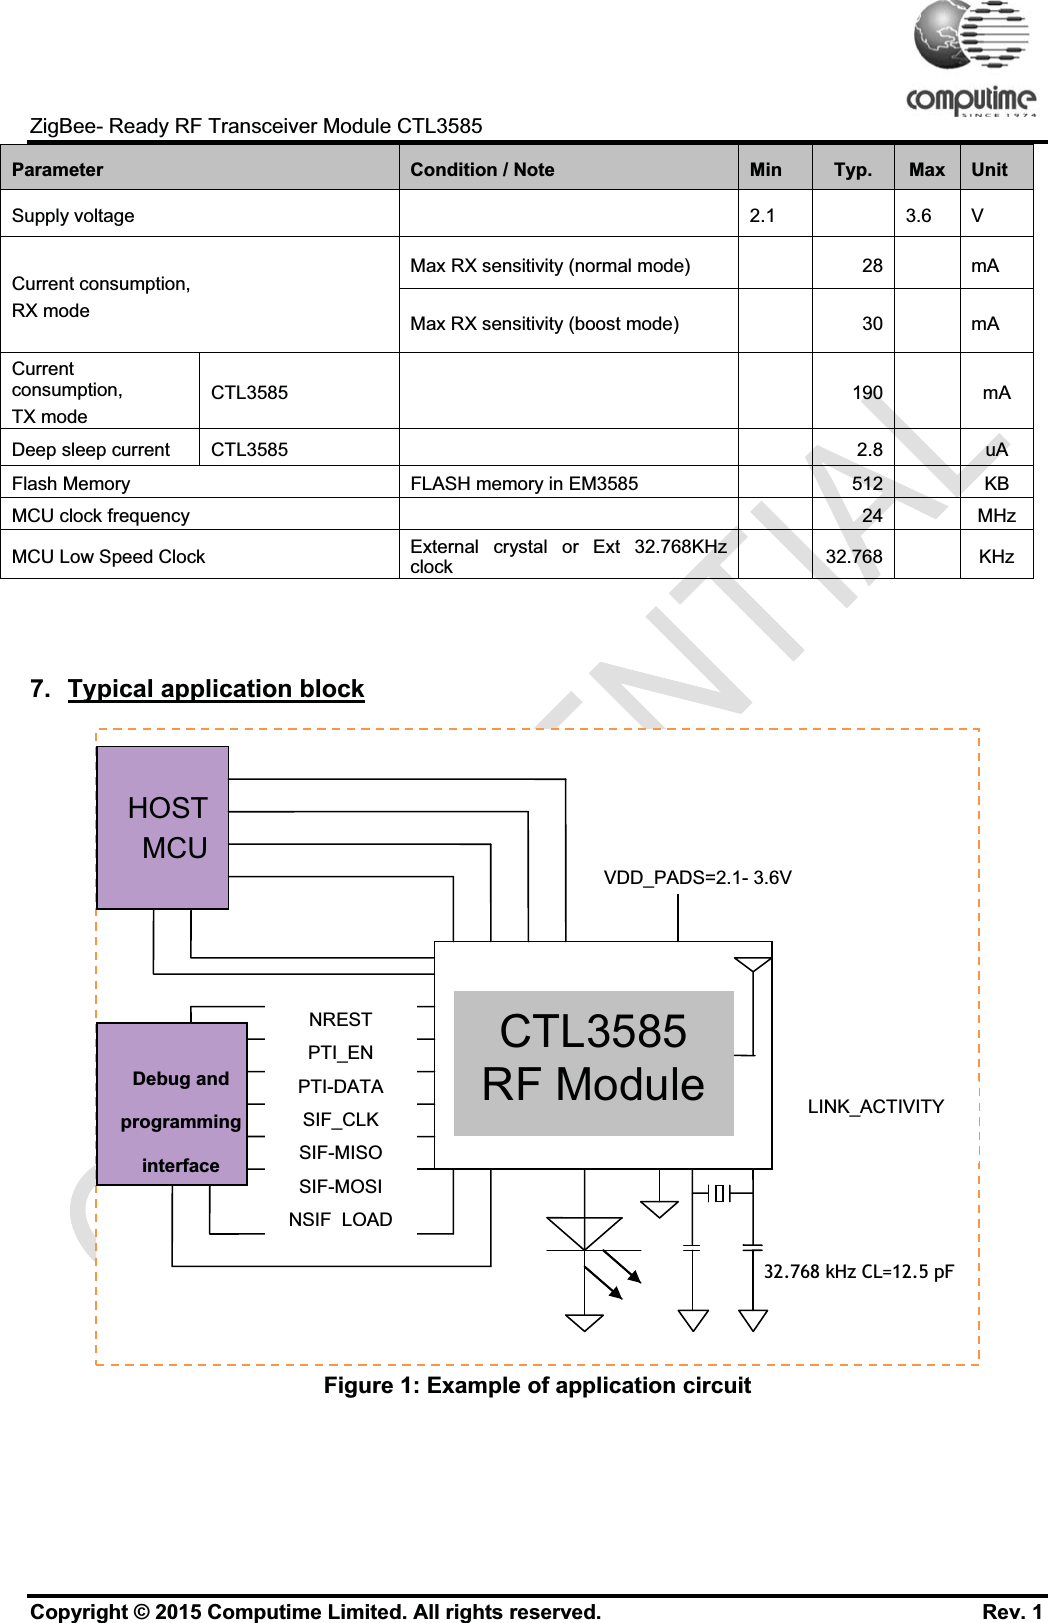 ZigBee- Ready RF Transceiver Module CTL3585Parameter  Condition / Note  Min  Typ. Max  Unit Supply voltage  2.1 3.6 VCurrent consumption, RX modeMax RX sensitivity (normal mode)  28 mAMax RX sensitivity (boost mode) 30 mACurrent consumption,TX modeCTL3585 190 mADeep sleep current CTL3585 2.8 uAFlash Memory FLASH memory in EM3585 512 KBMCU clock frequency  24 MHzMCU Low Speed Clock External crystal or Ext 32.768KHz clock 32.768 KHz7. Typical application blockFigure 1: Example of application circuitCTL3585RF ModuleVDD_PADS=2.1- 3.6VDebug andprogramminginterfaceHOST MCUNRESTPTI_ENPTI-DATASIF_CLKSIF-MISOSIF-MOSINSIF LOADLINK_ACTIVITY32.768 kHz CL=12.5 pF Copyright © 2015 Computime Limited. All rights reserved.                                                      Rev. 1